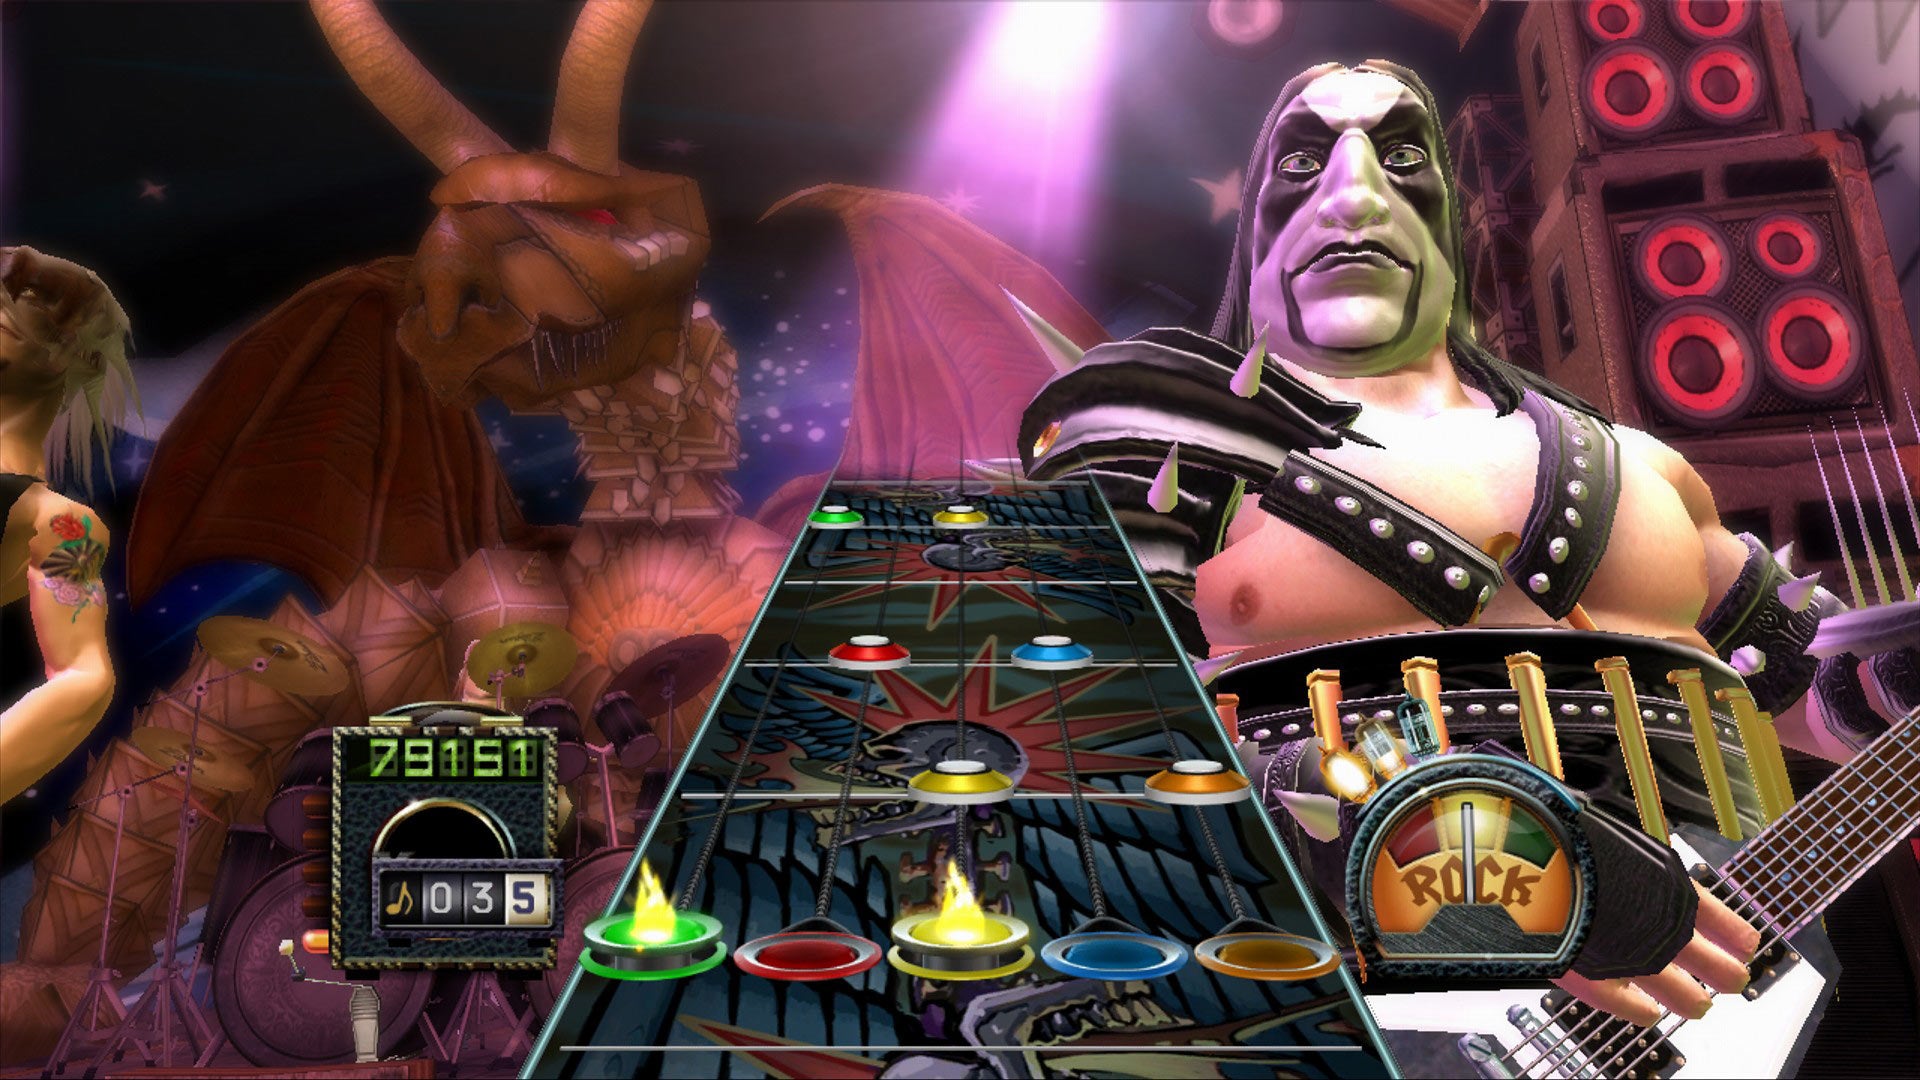 New Guitar Hero has redesigned controller, firstperson perspective